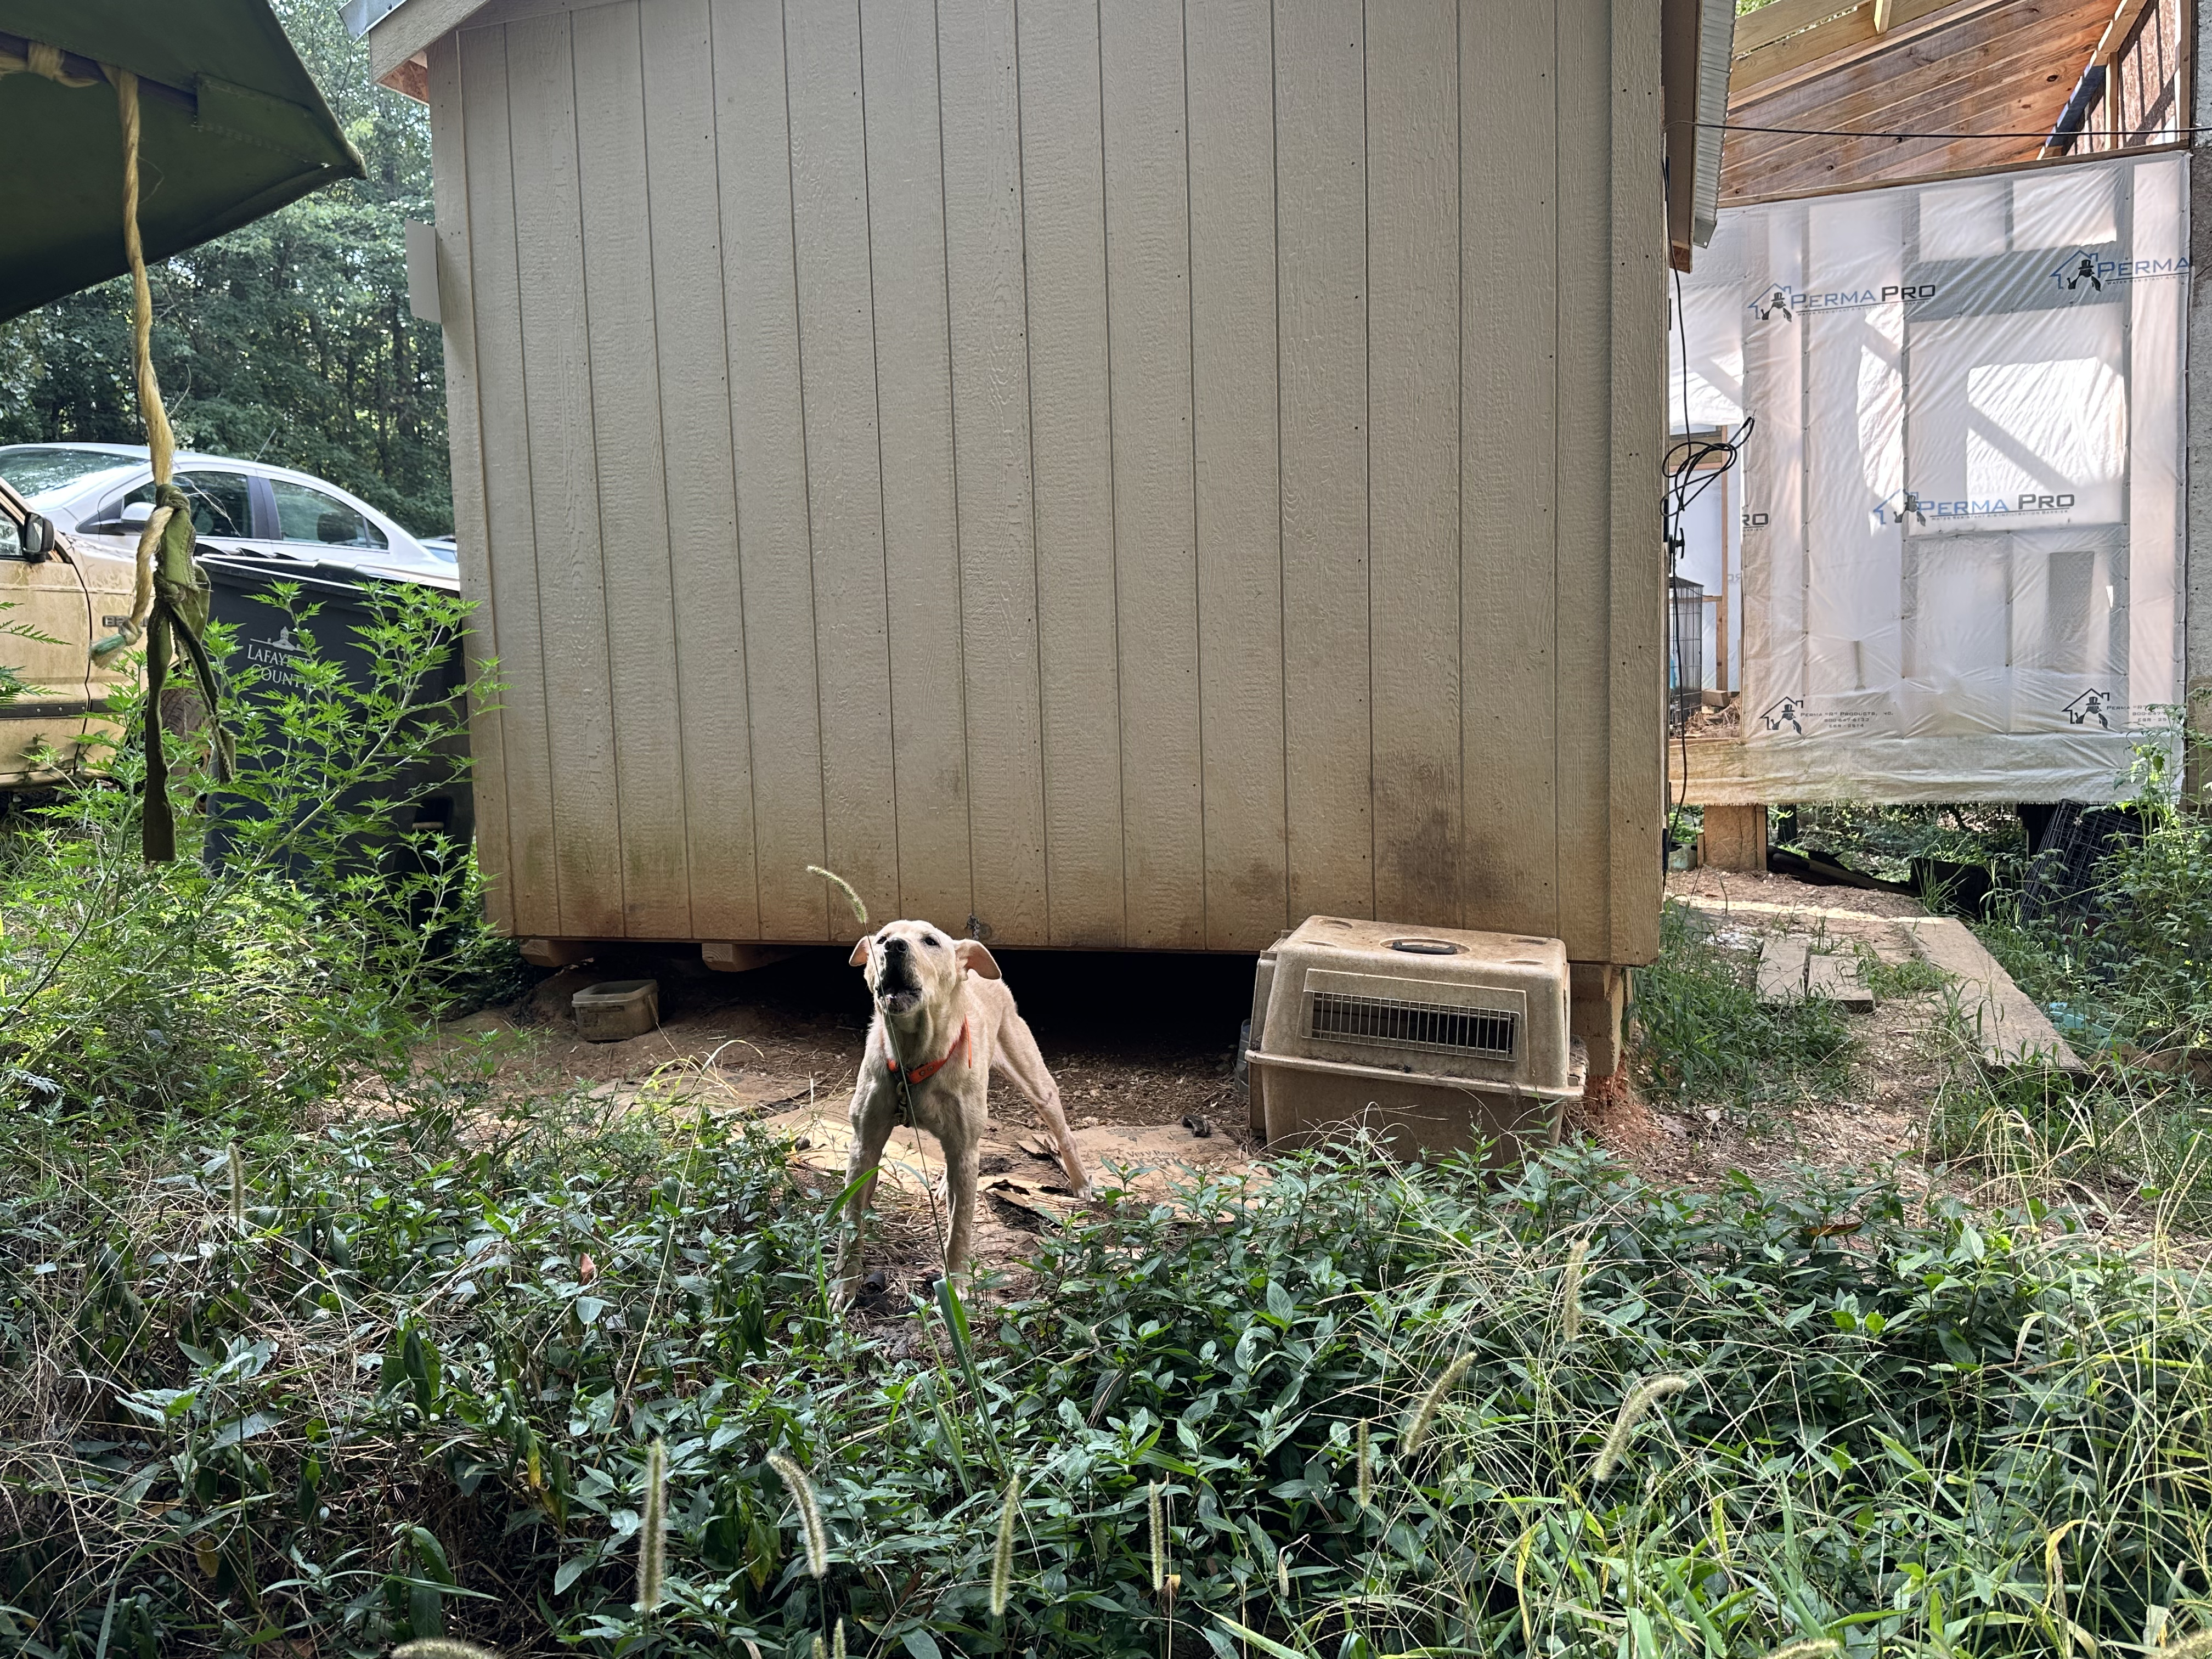 A dog is chained beside a decaying building.